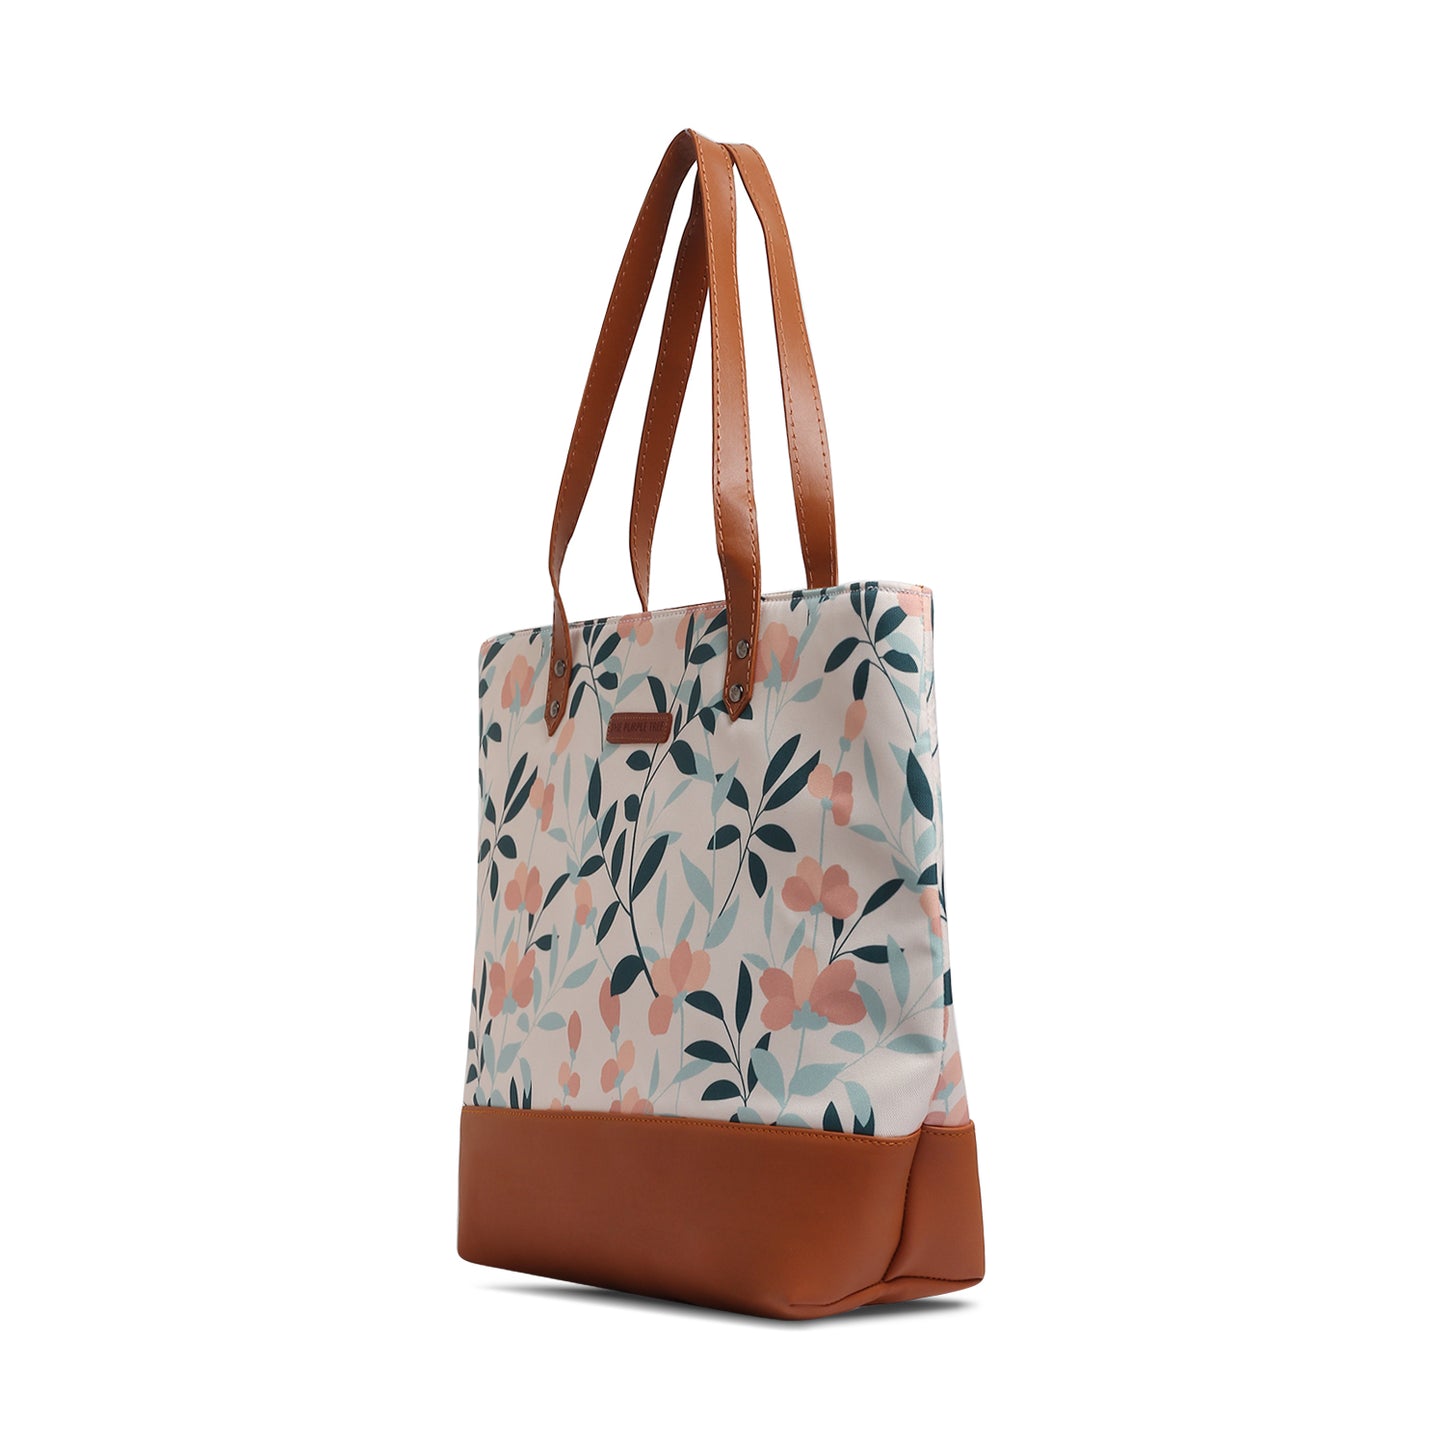 Alyssa Leather Tote Bag For Women